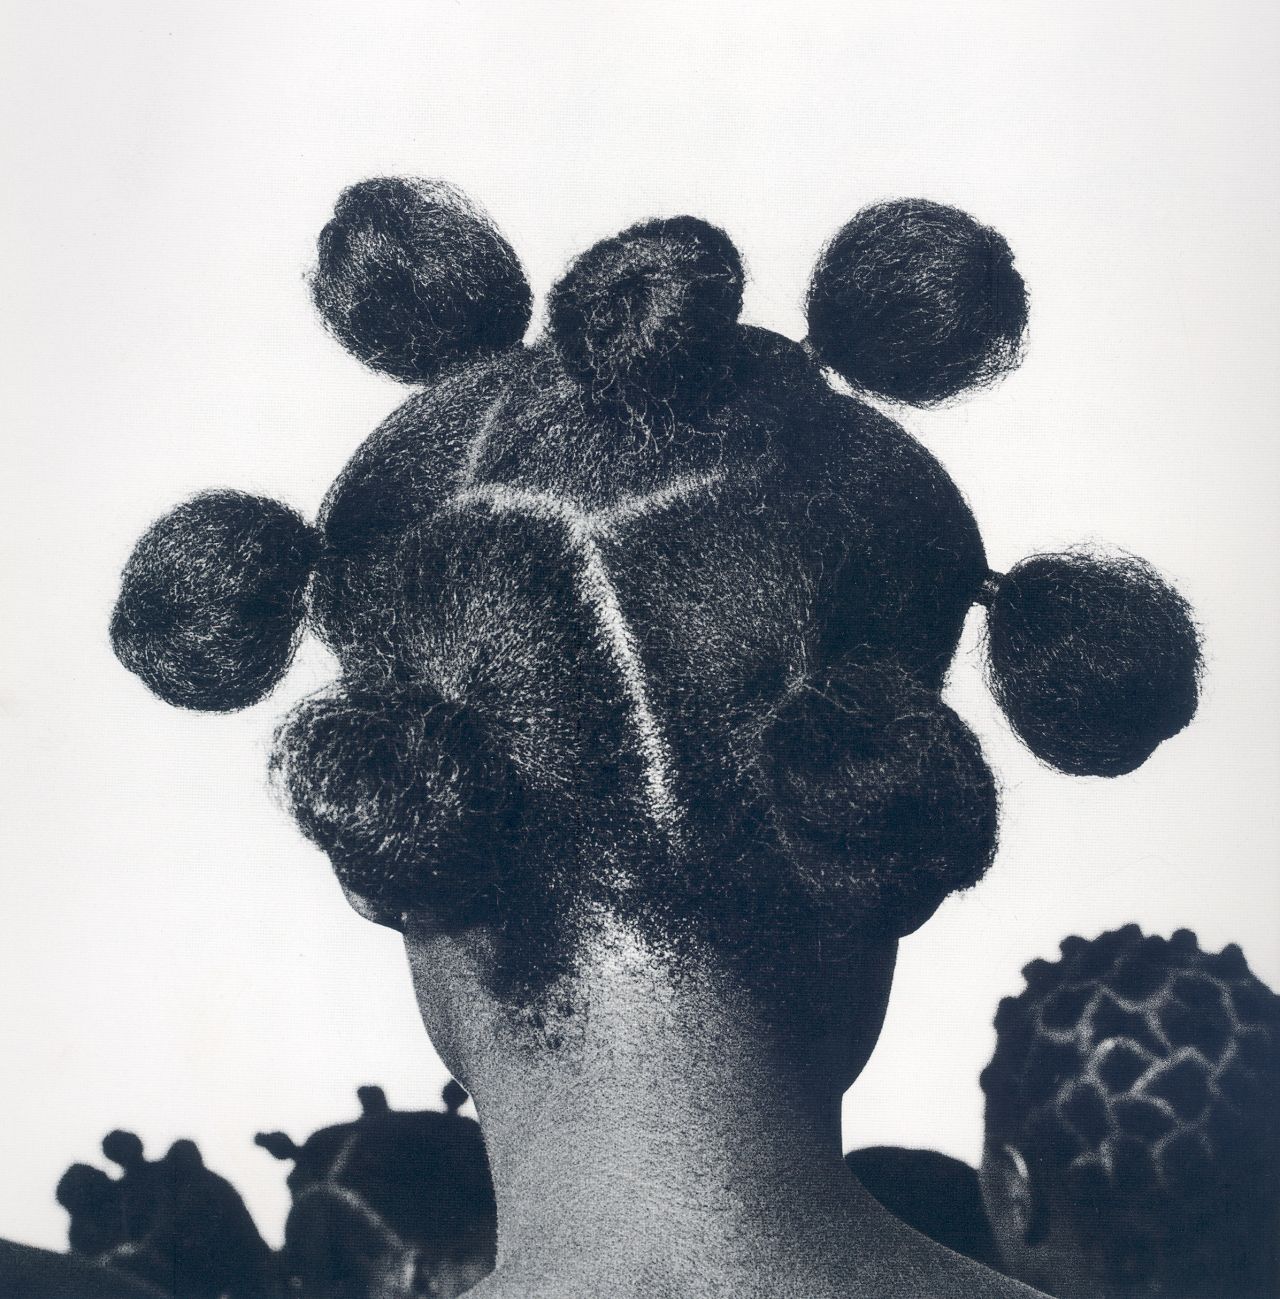 Mkpuk Eba, 1974. Ojeikere began working on his Hairstyle series in the late 1960s after he joined the Nigerian Arts Council and began documenting the country's culture.